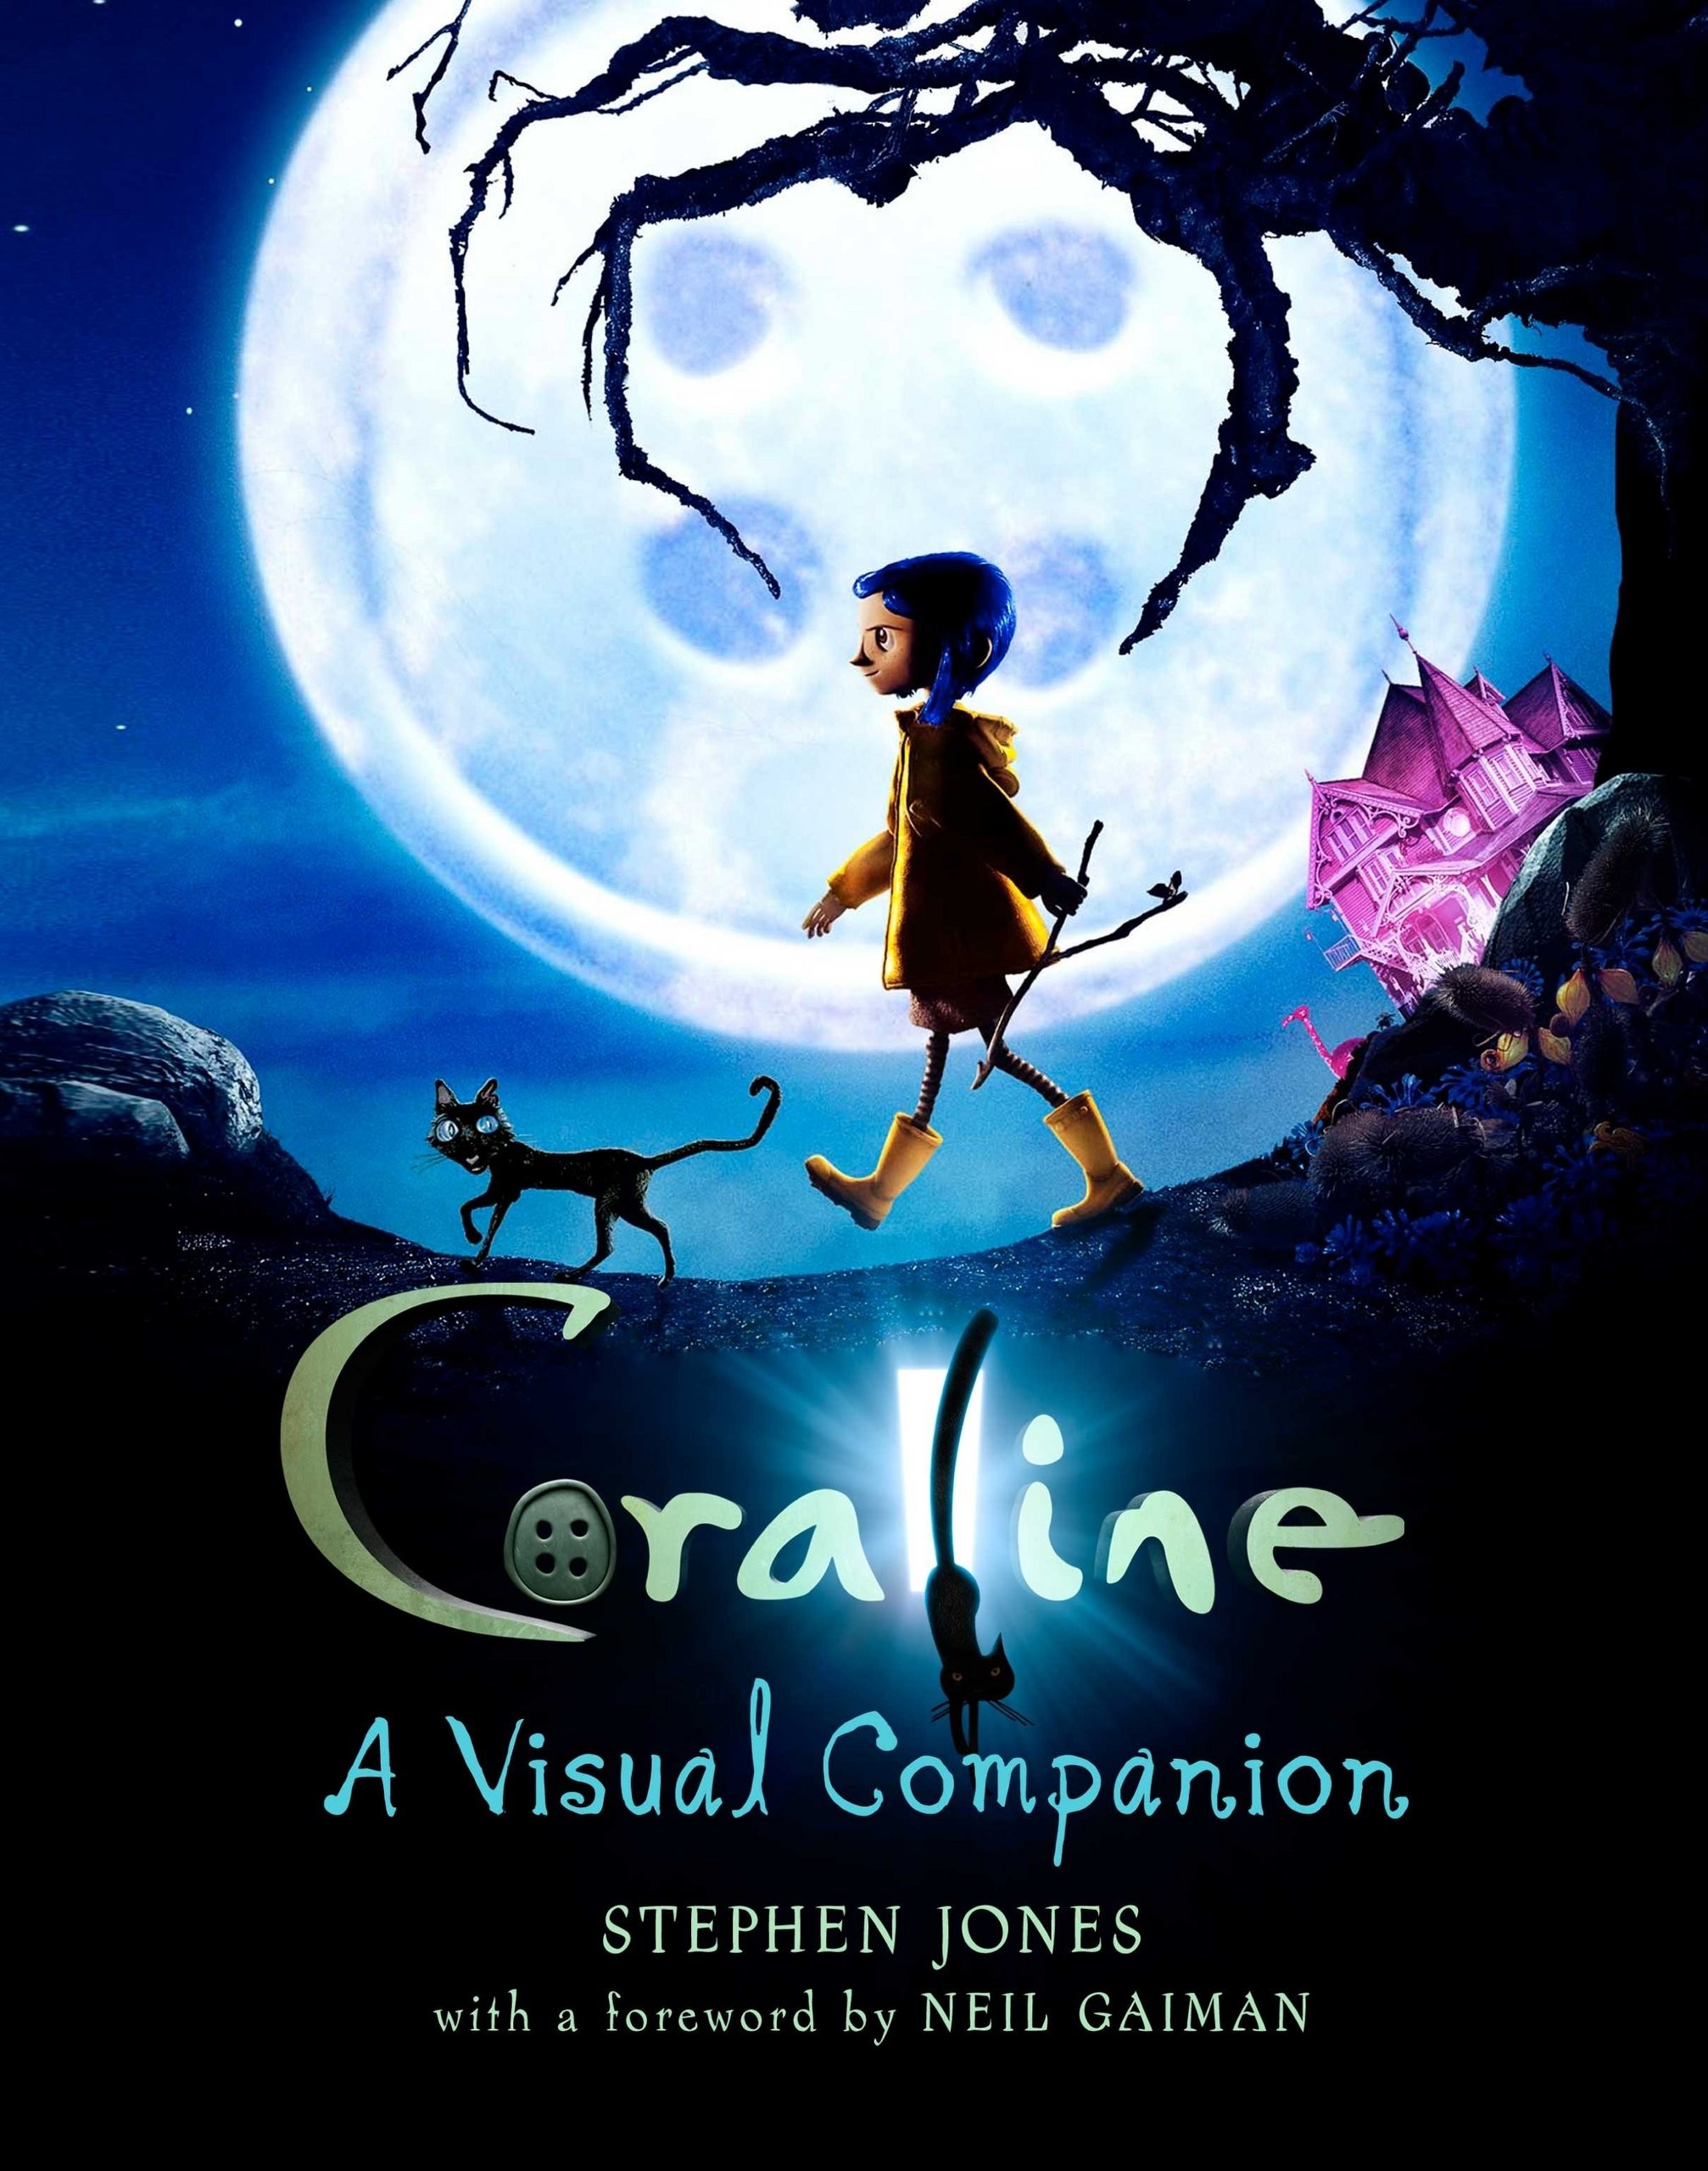 Coraline Jones Images Coraline Looking For The Ghost - Official Coraline Movie Poster - HD Wallpaper 